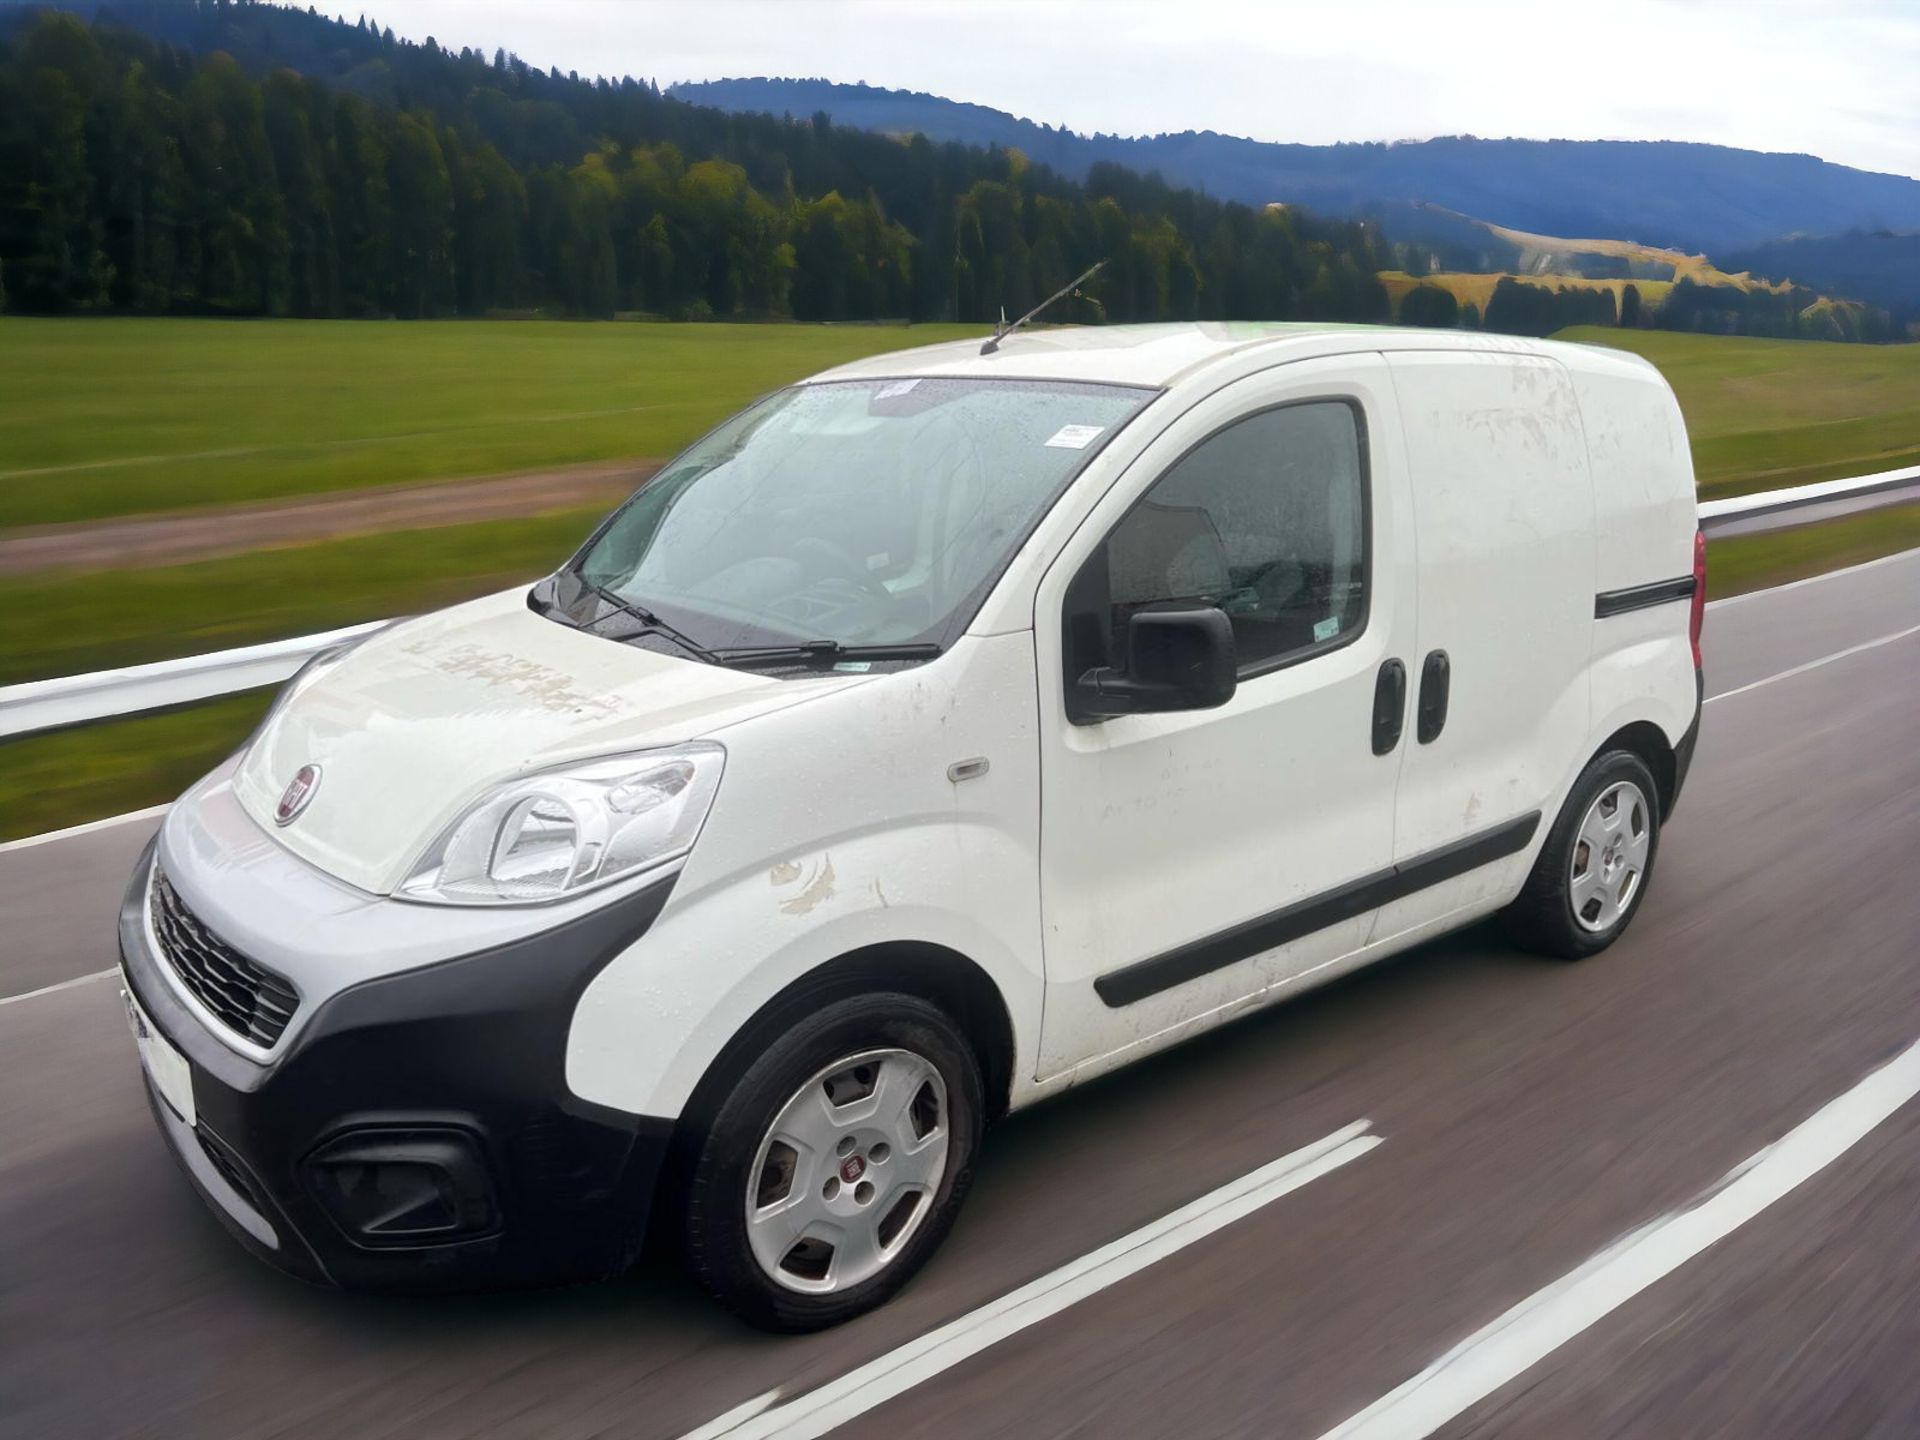 **SPARES OR REAPIRS** 2019 FIAT FIORINO SX 1.3 HDI VAN - YOUR RELIABLE BUSINESS COMPANION - Bild 6 aus 11